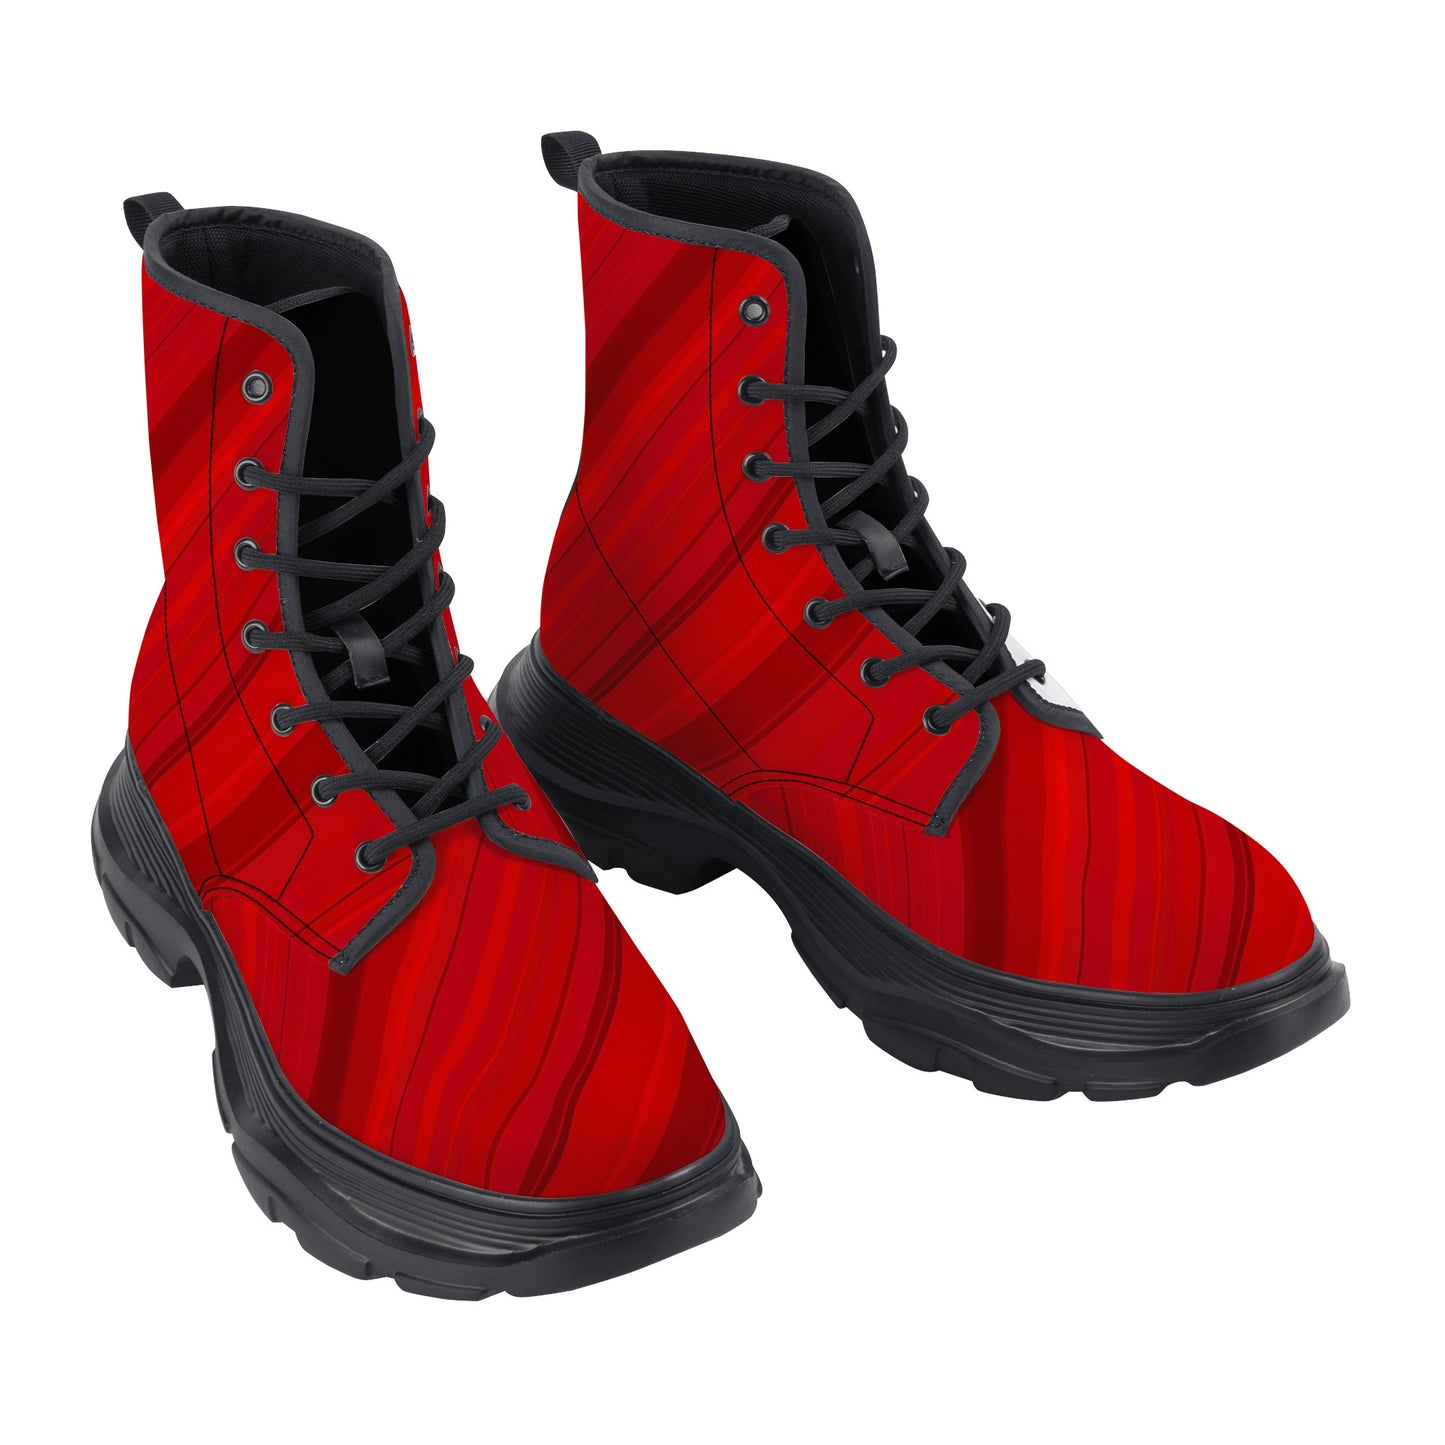 Unisex Chunky Boots - Red